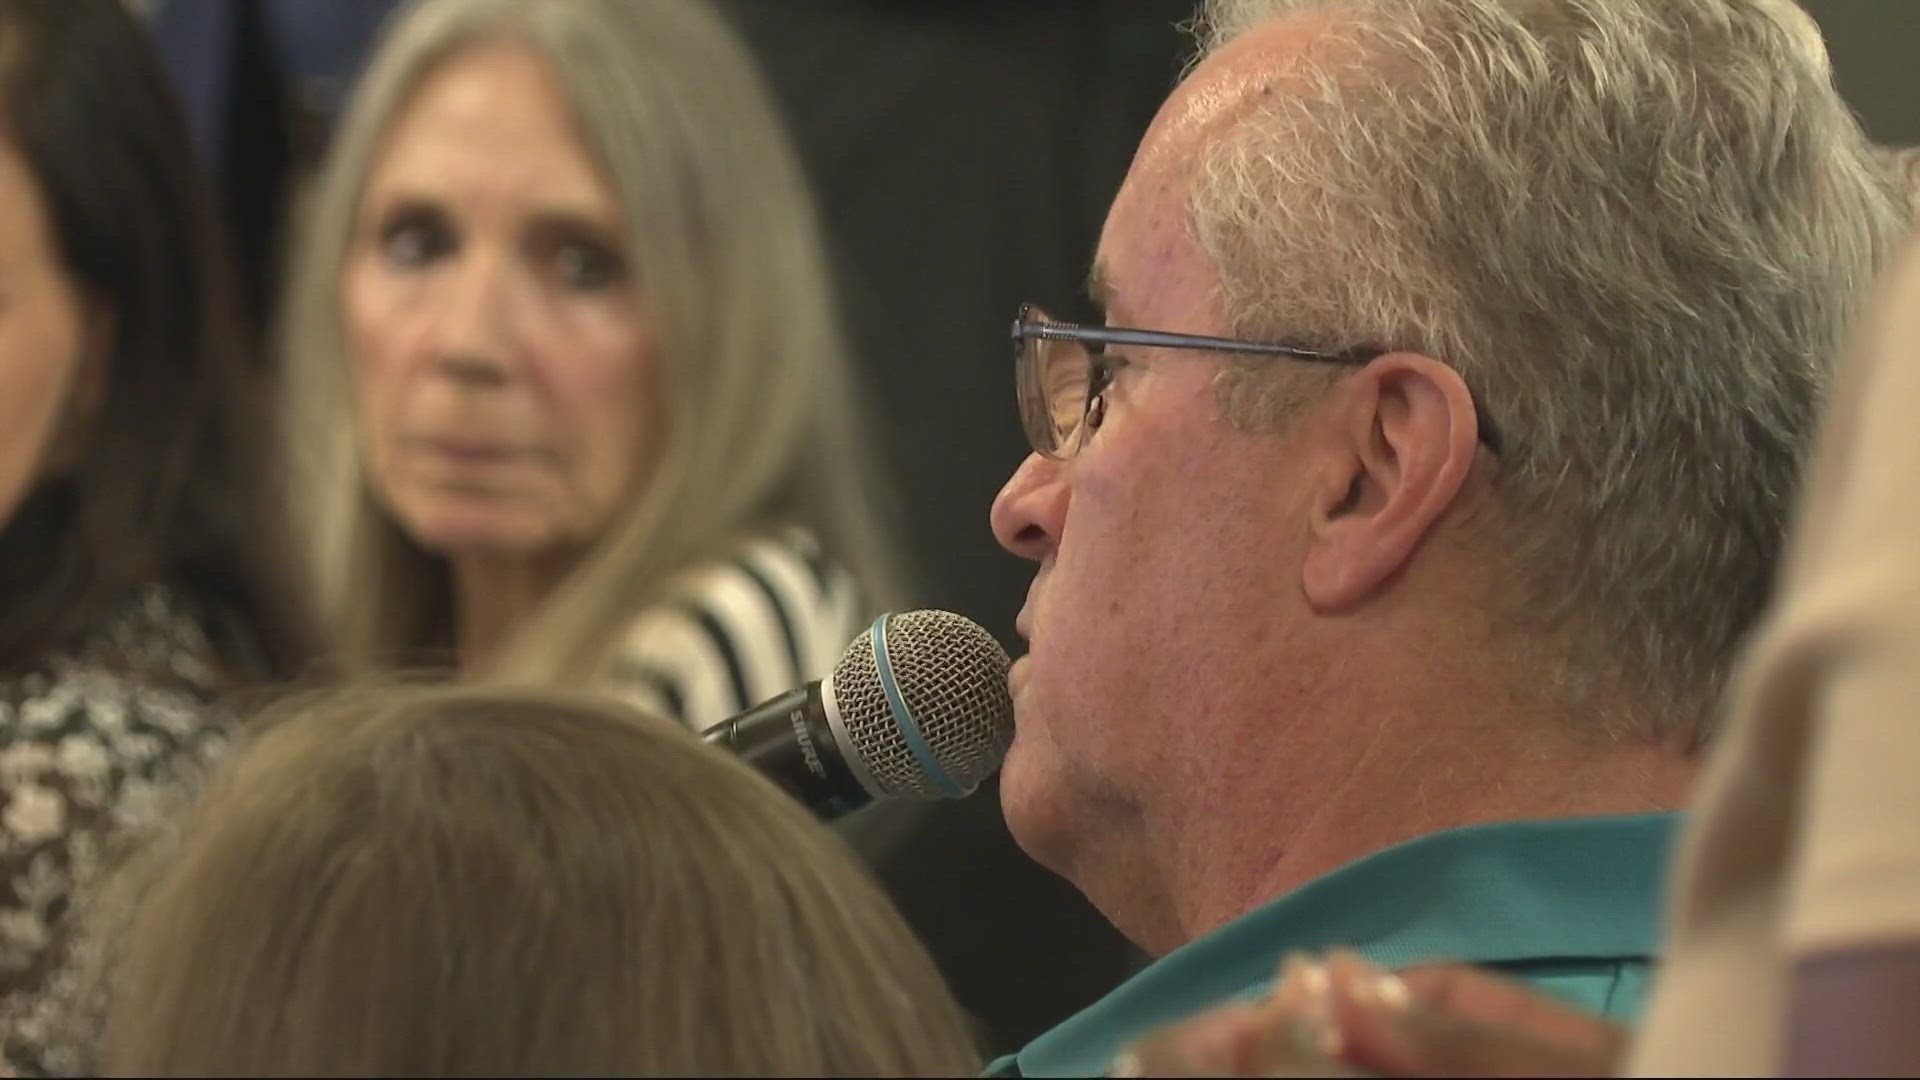 Jacksonville residents weigh in on renovations to Jaguar stadium.